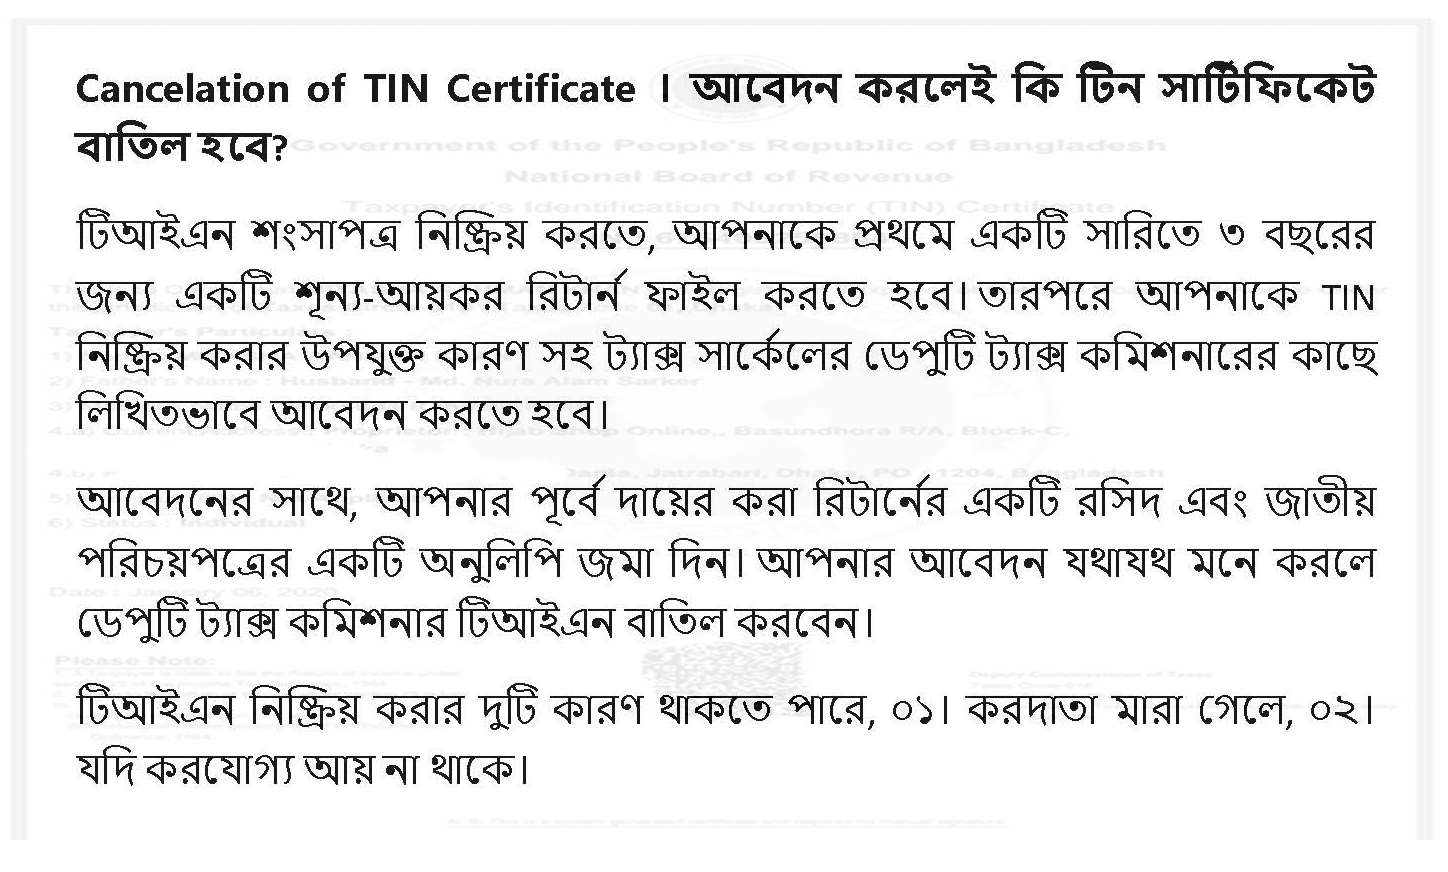 Cancelation of TIN Certificate